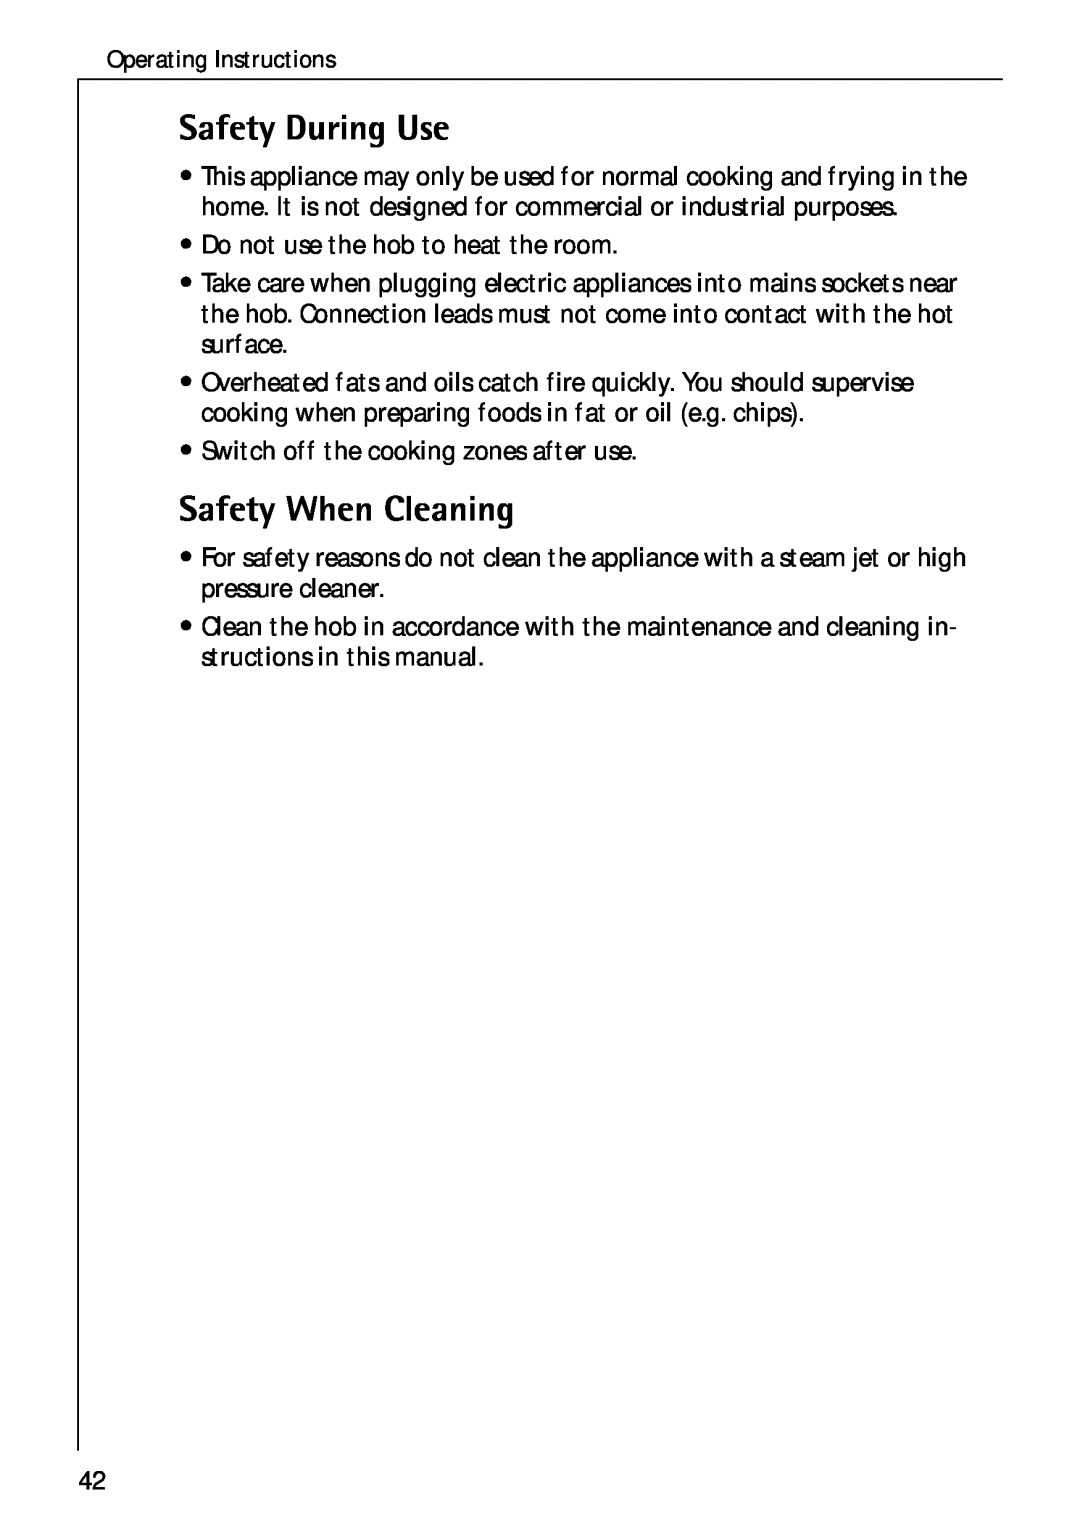 Electrolux C75301K operating instructions Safety During Use, Safety When Cleaning 